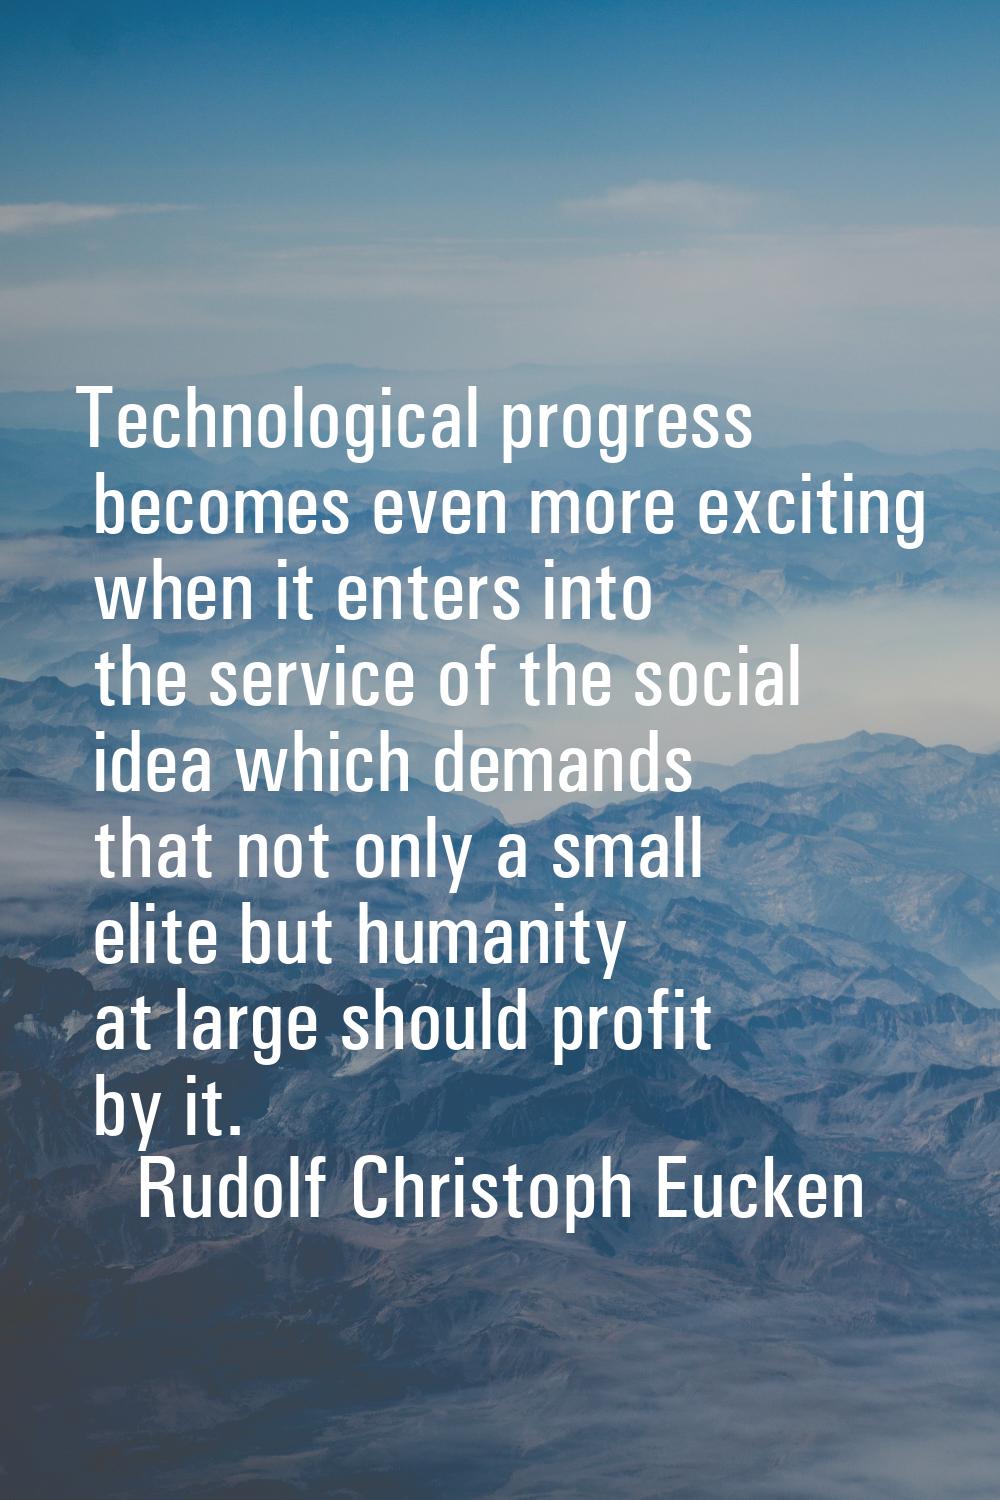 Technological progress becomes even more exciting when it enters into the service of the social ide